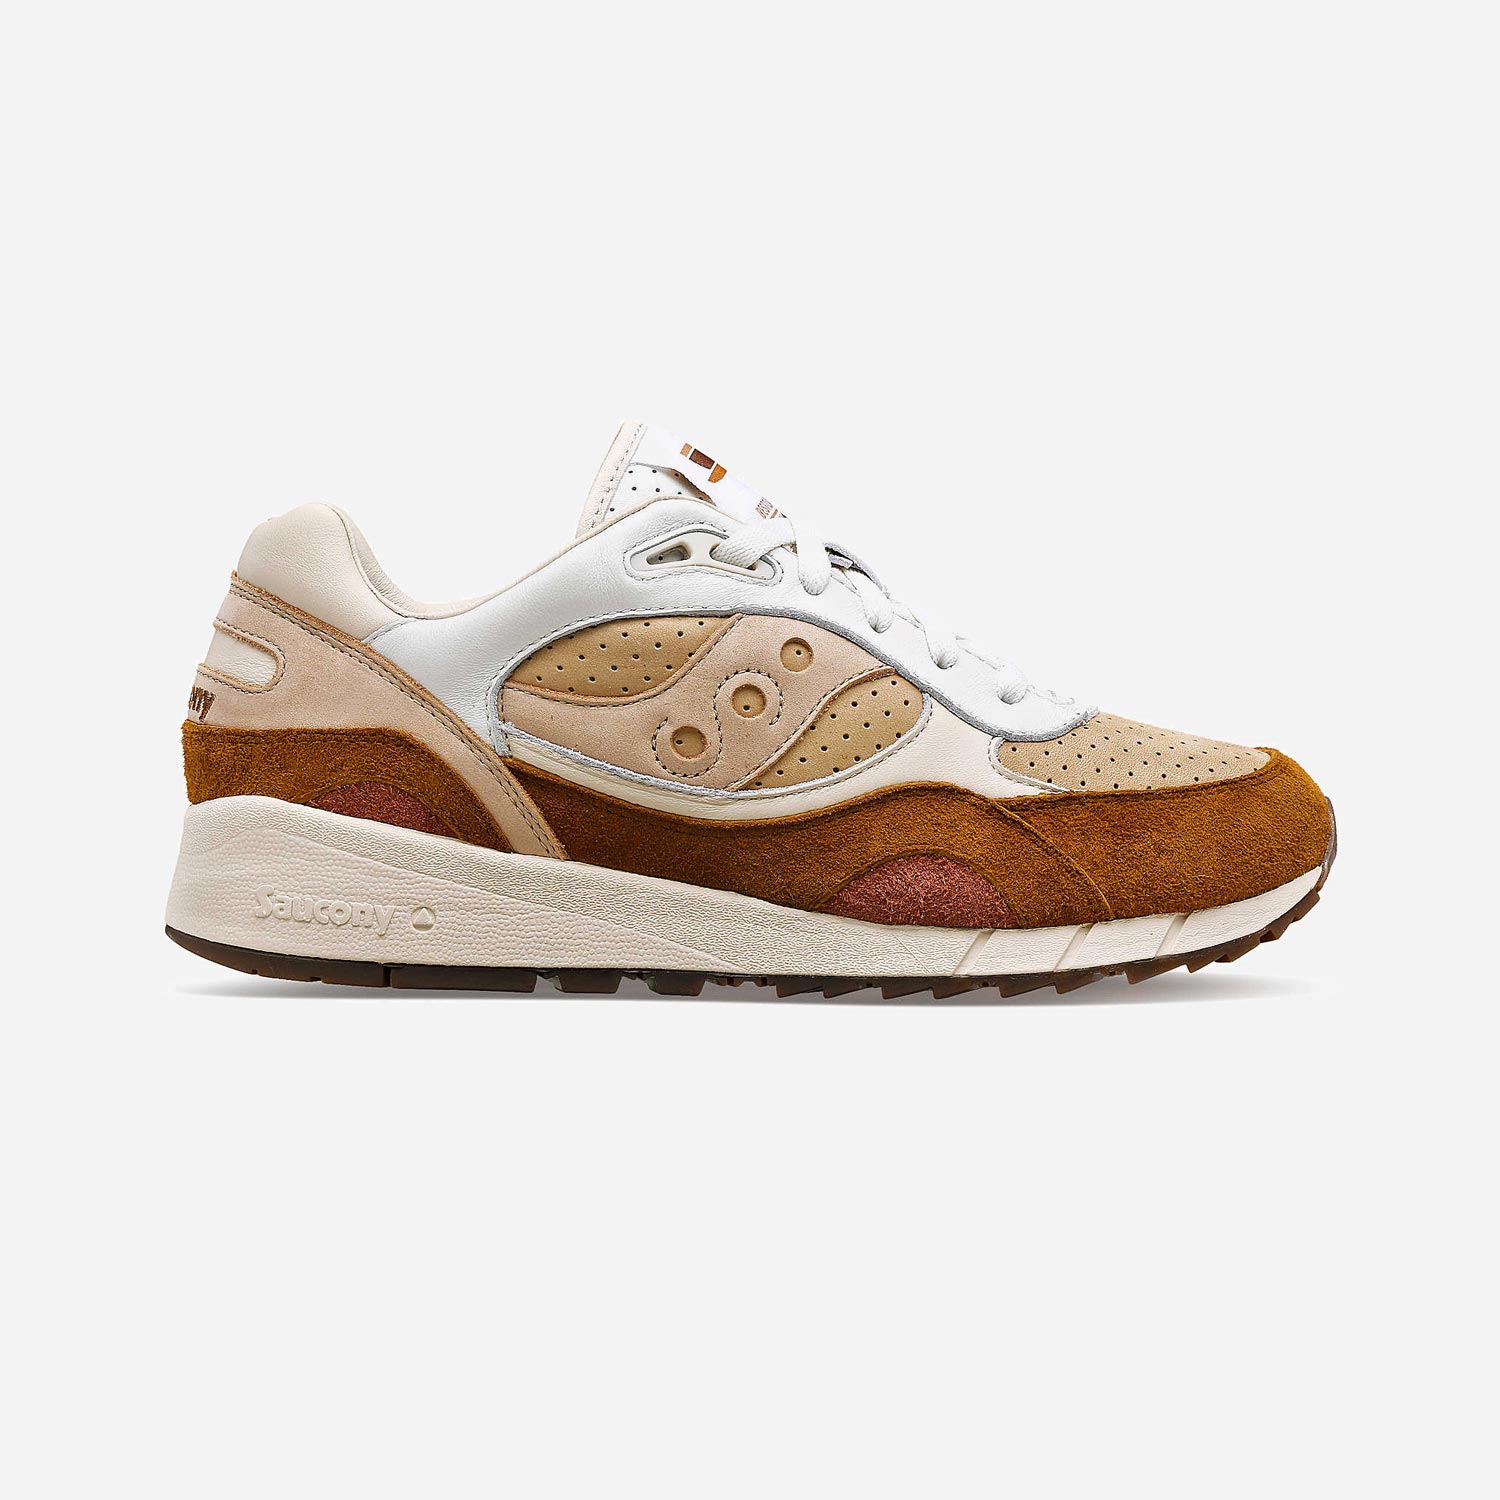 Saucony Shadow 6000 - Brown/White